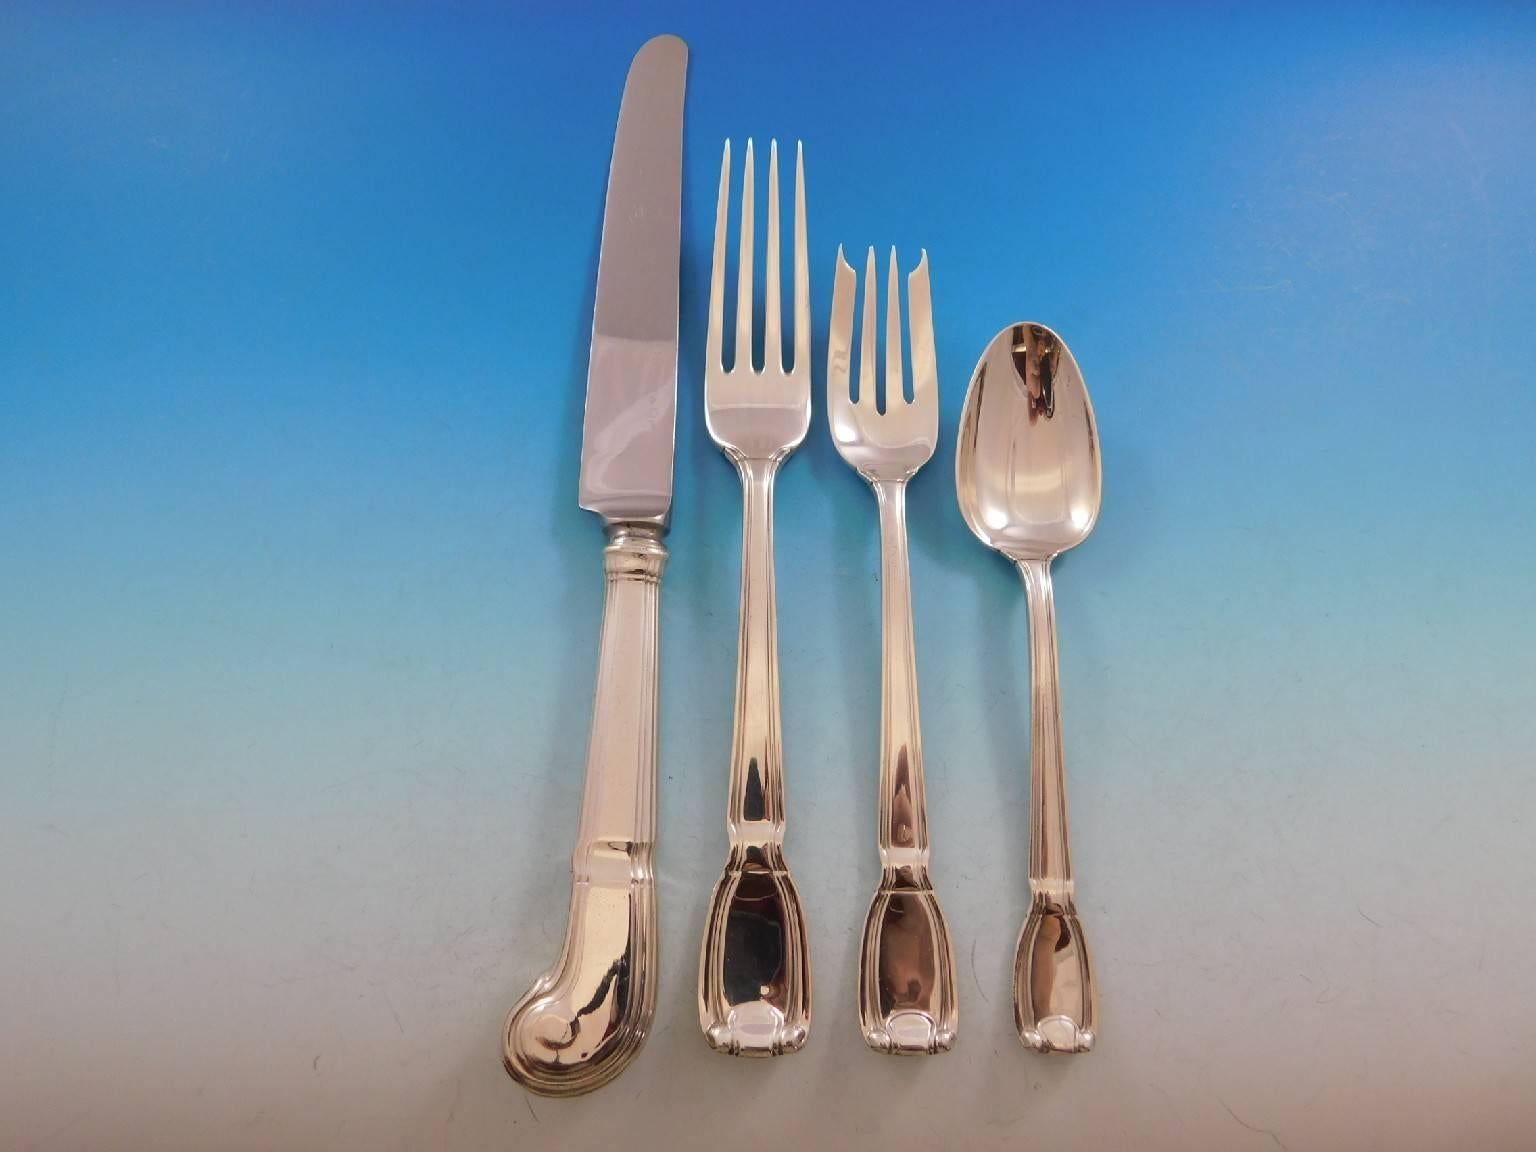 Gorgeous monumental Castilian by Tiffany & Co sterling silver dinner and luncheon size flatware set of 126 pieces. This set includes:

12 dinner size knives, pistol grip, 10